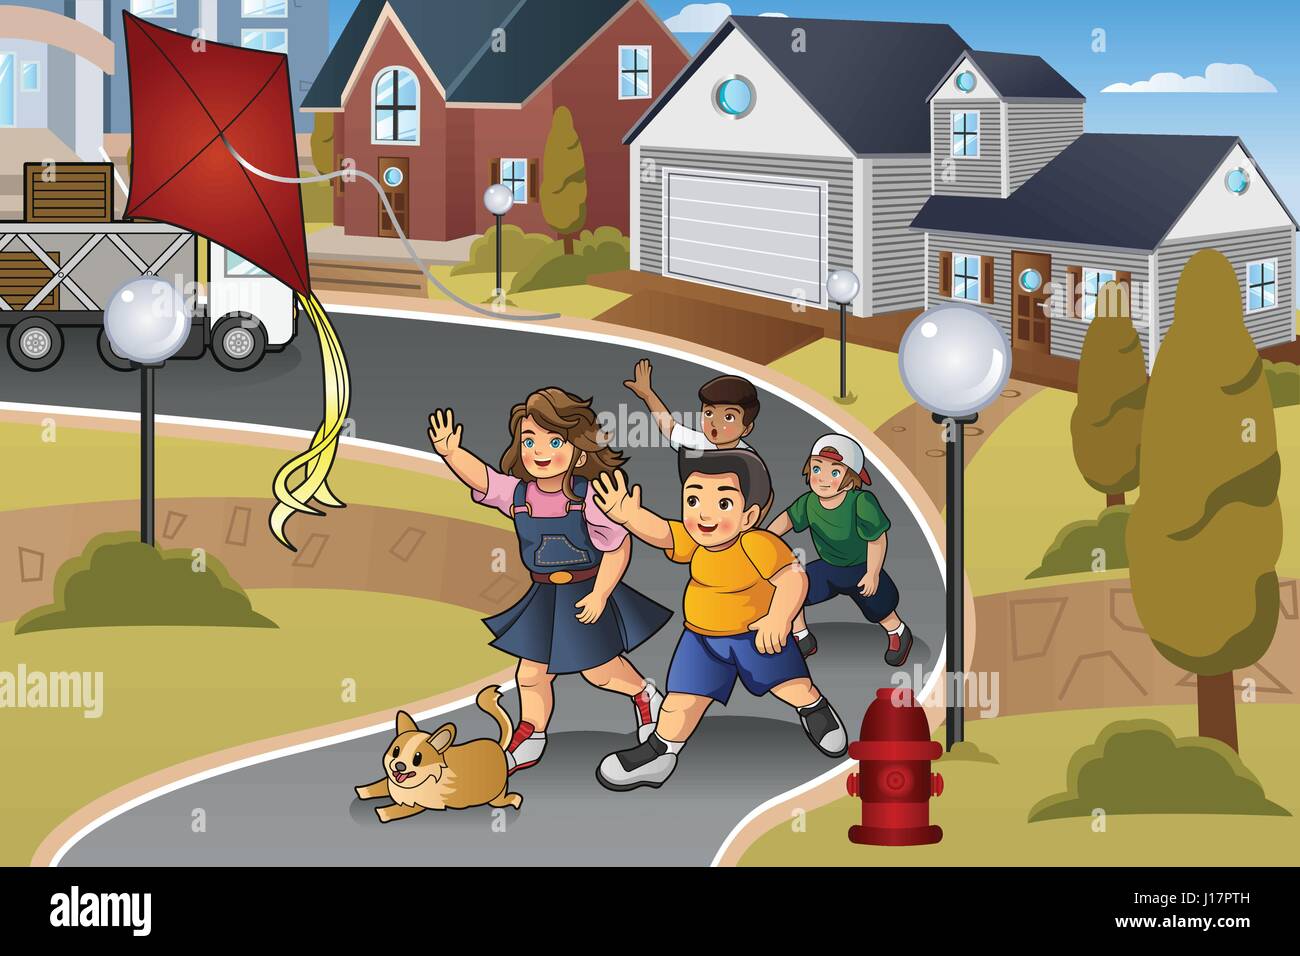 A vector illustration of kids chasing a lost kite in the neighborhood Stock Vector